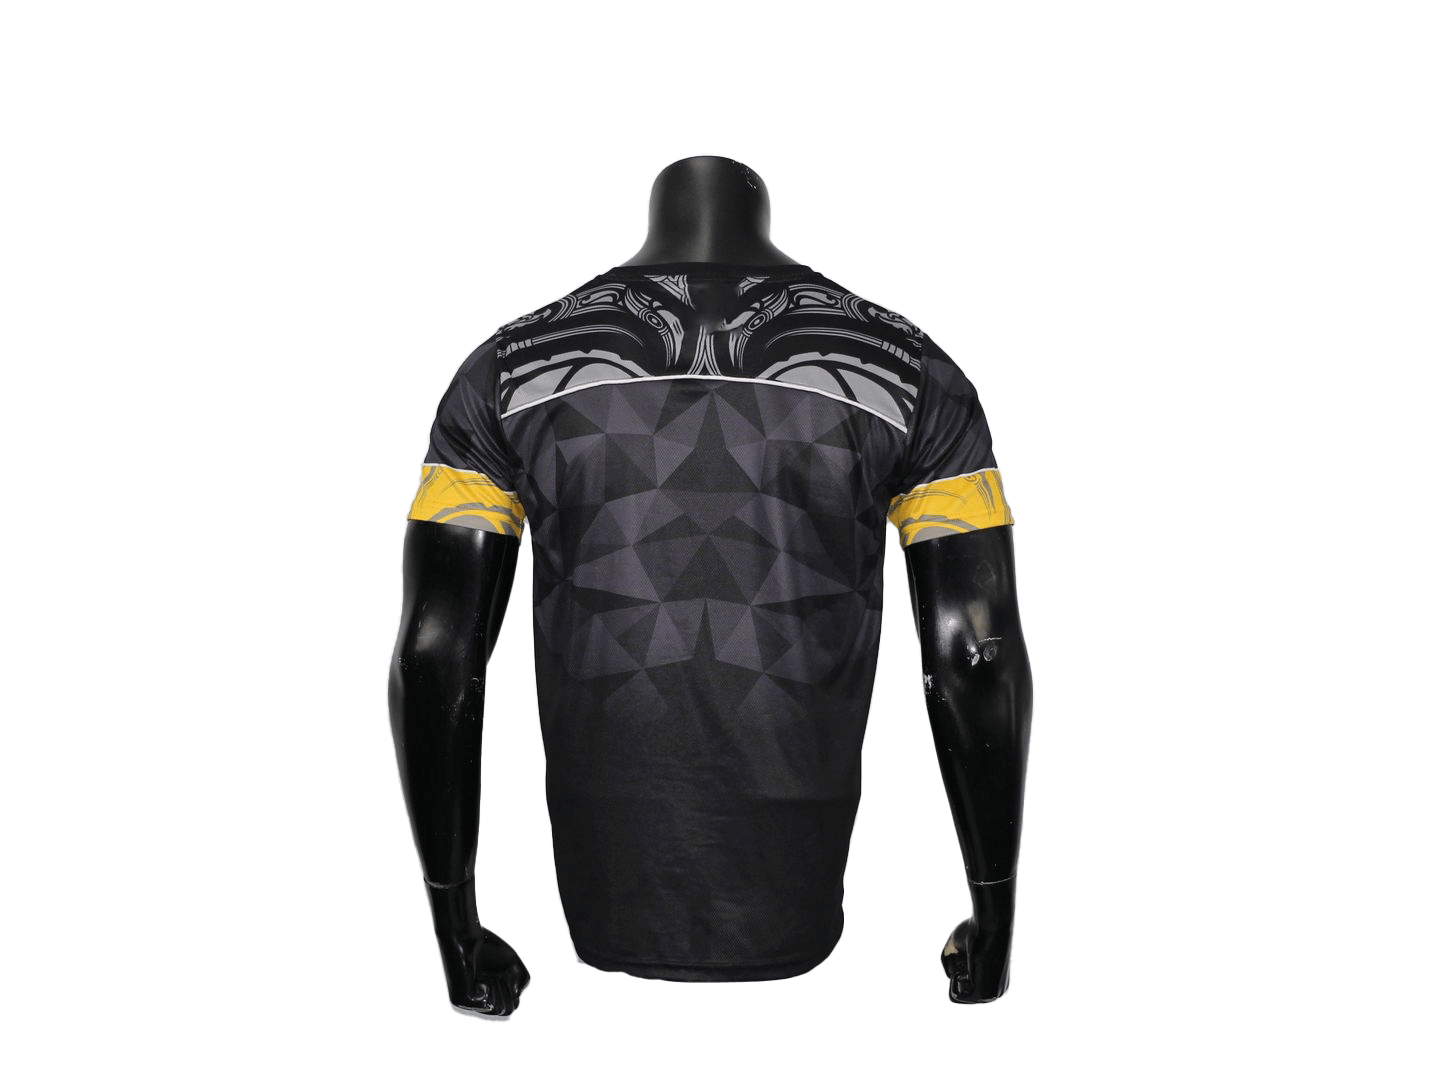 Mens Rugby Shirts